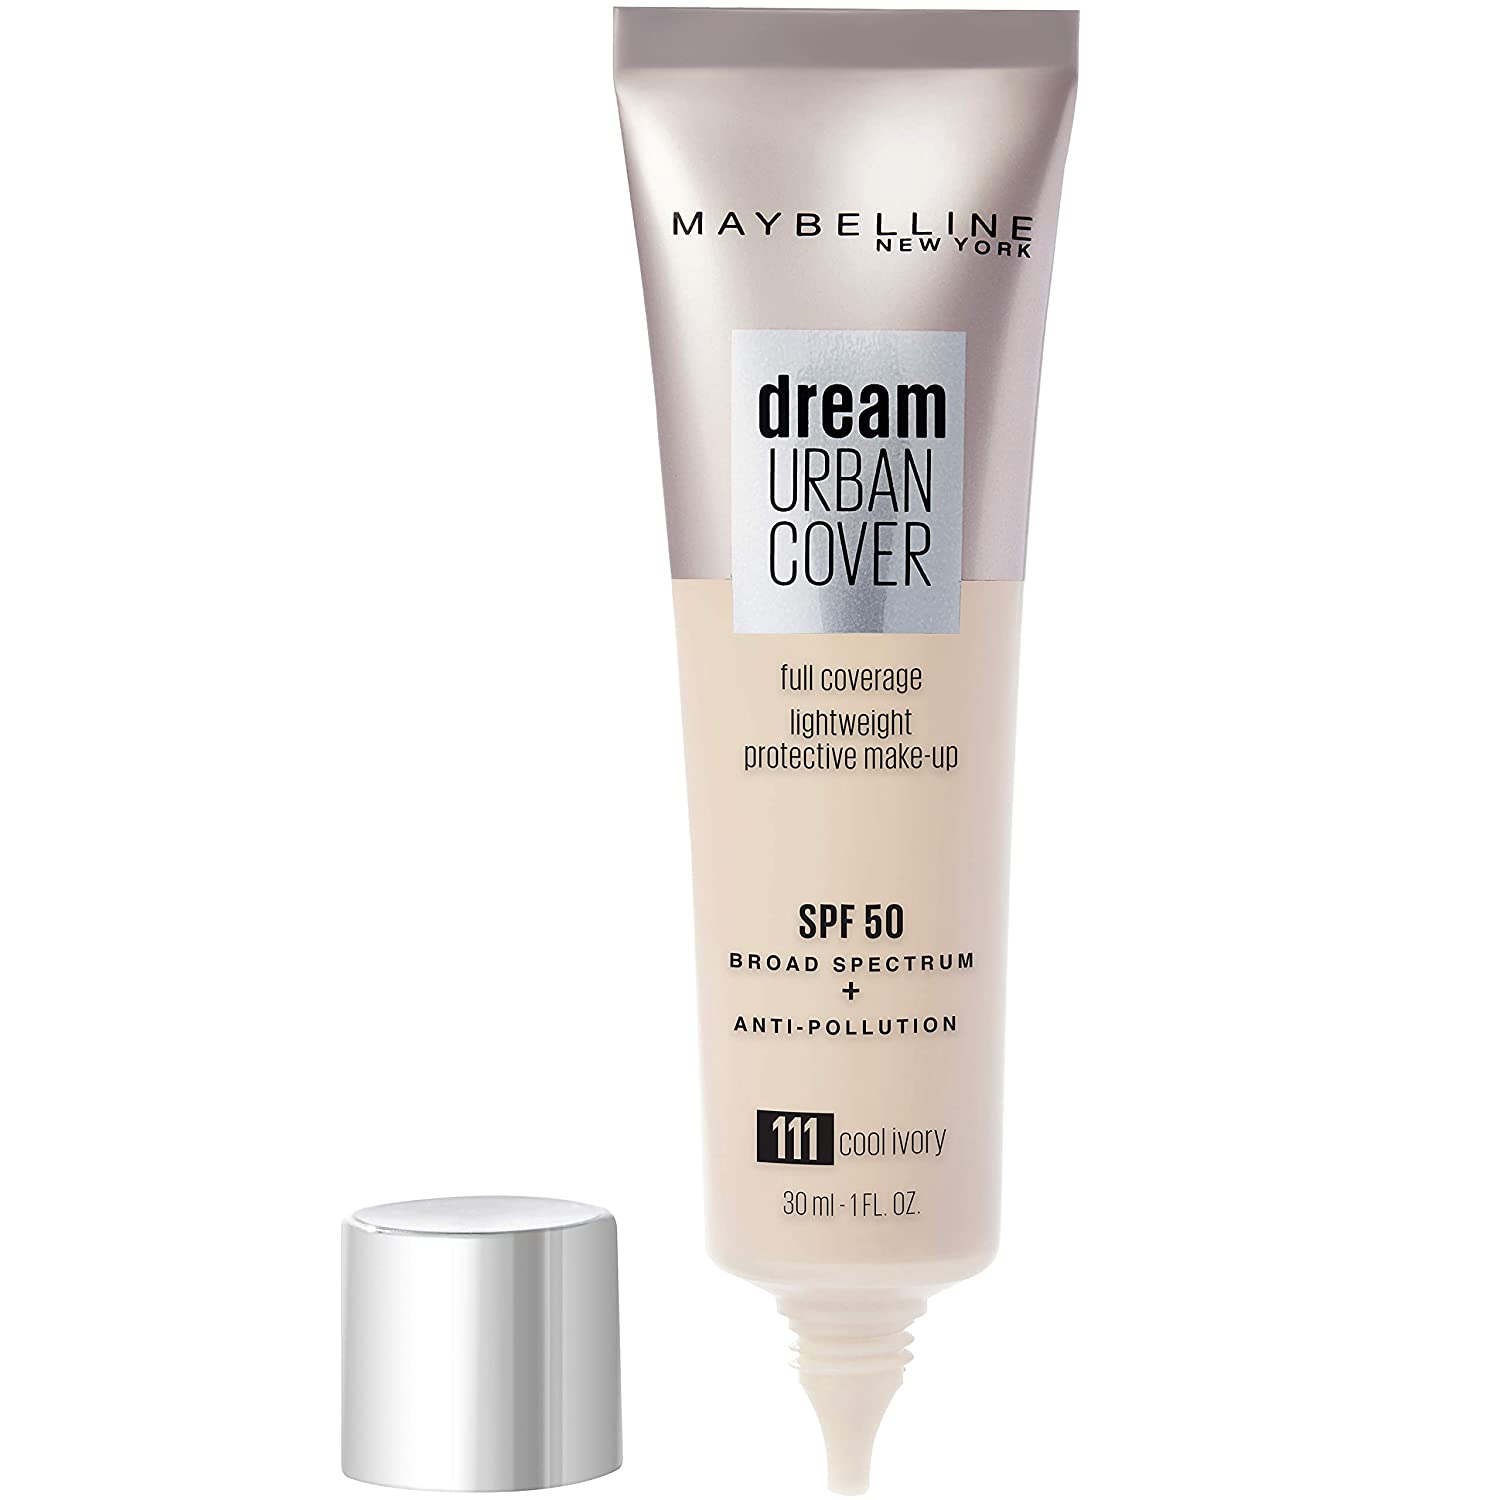 Maybelline Dream Urban Cover Foundation 111 Cool Ivory Spf50 30 Ml